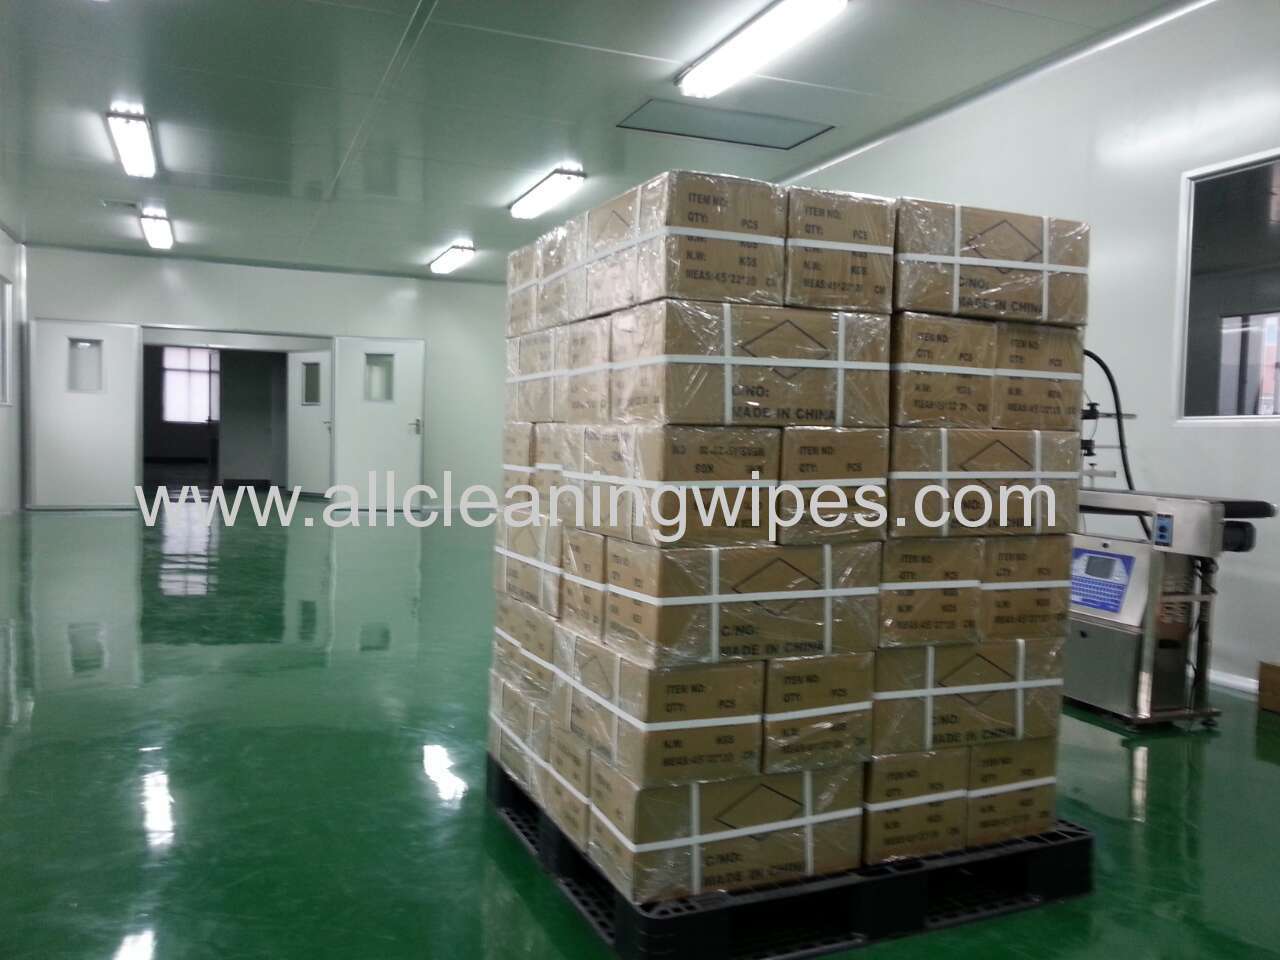 finsihed products warehouse